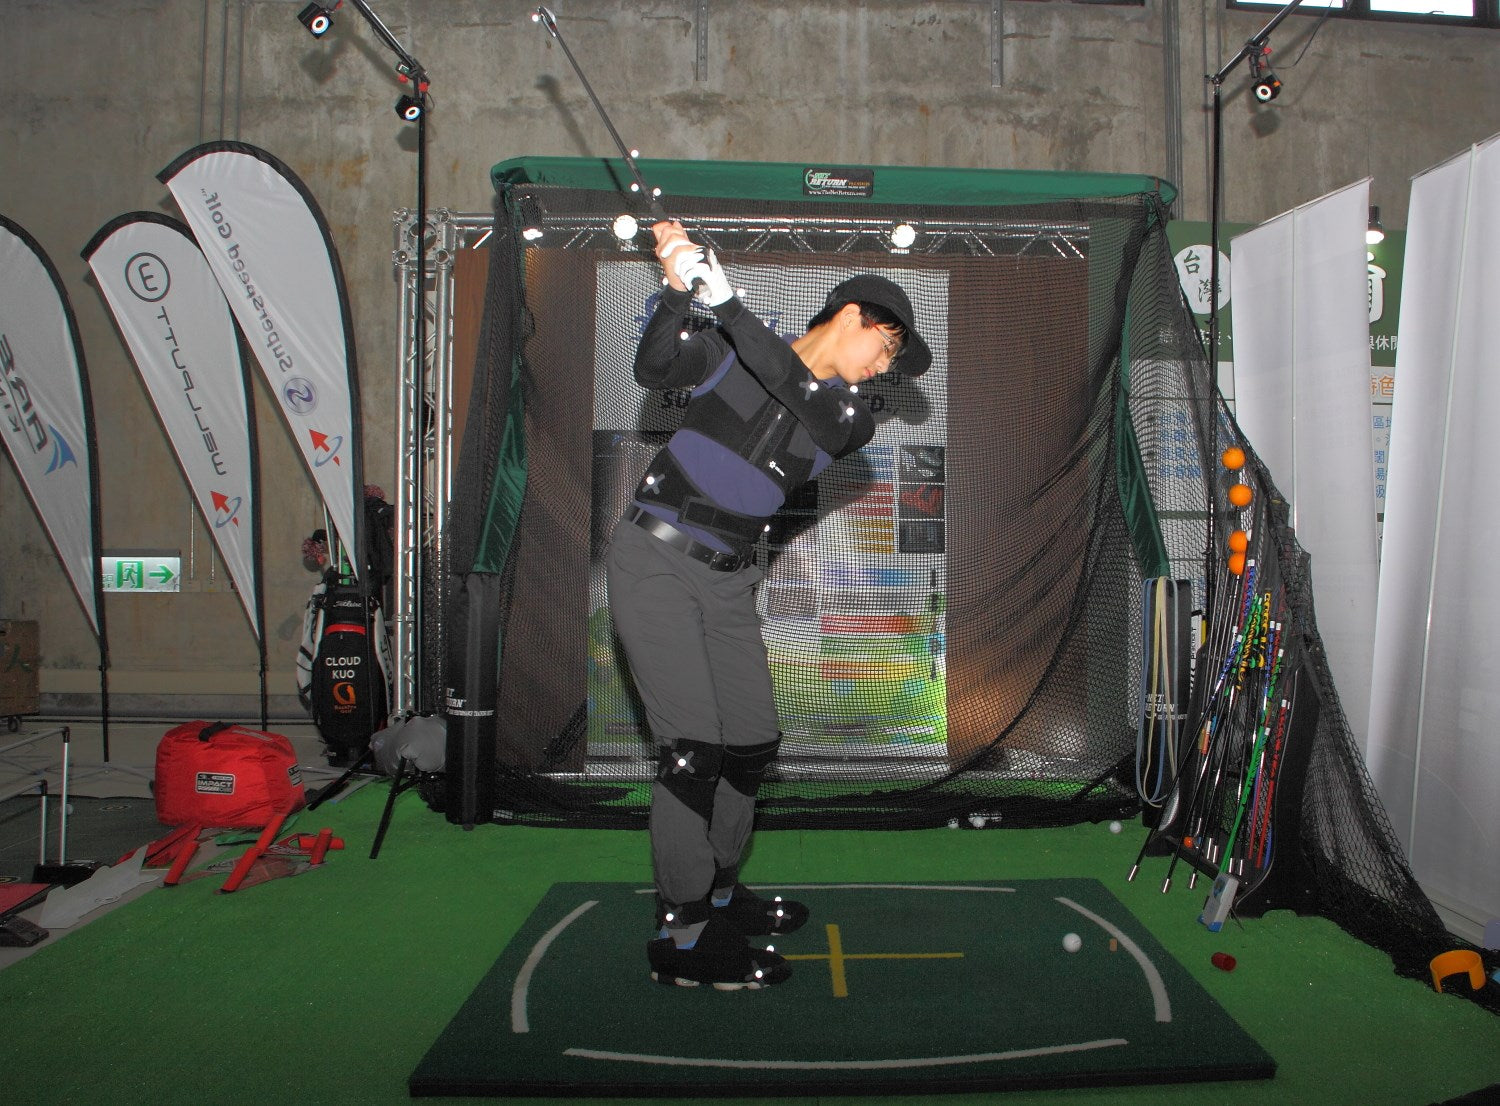 Golf Taiwan Trade Show with The Net Return Pro Series